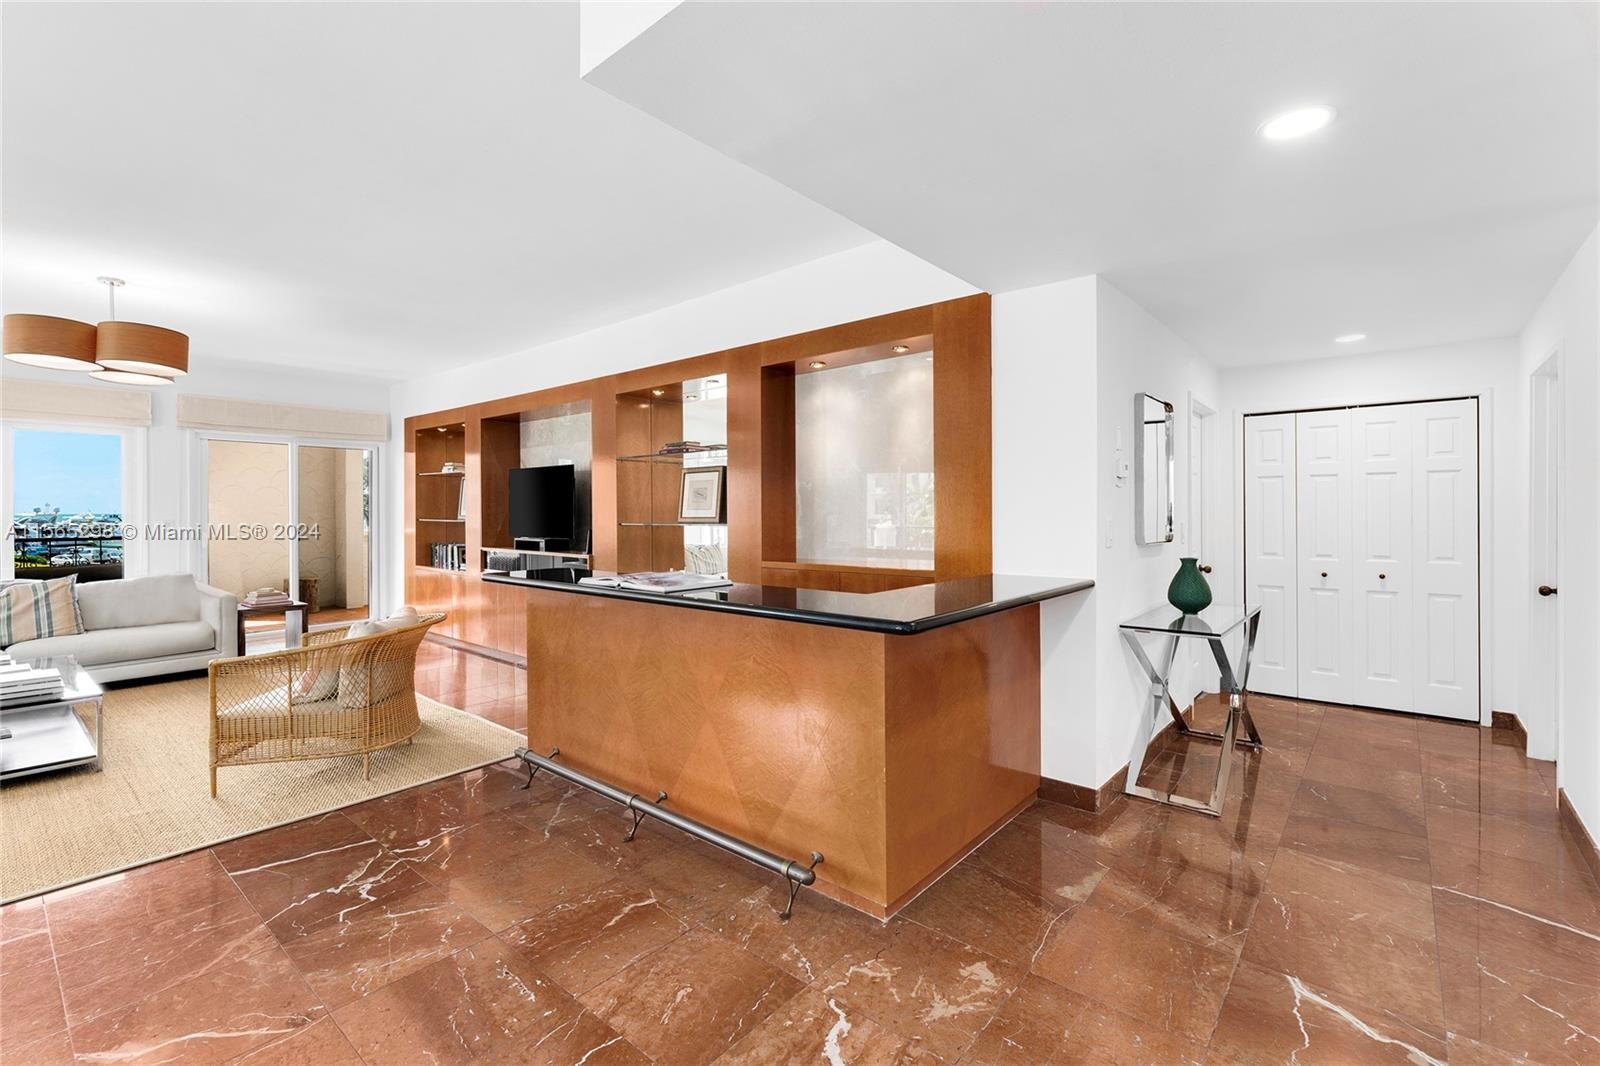 3. 2221 Fisher Island Dr